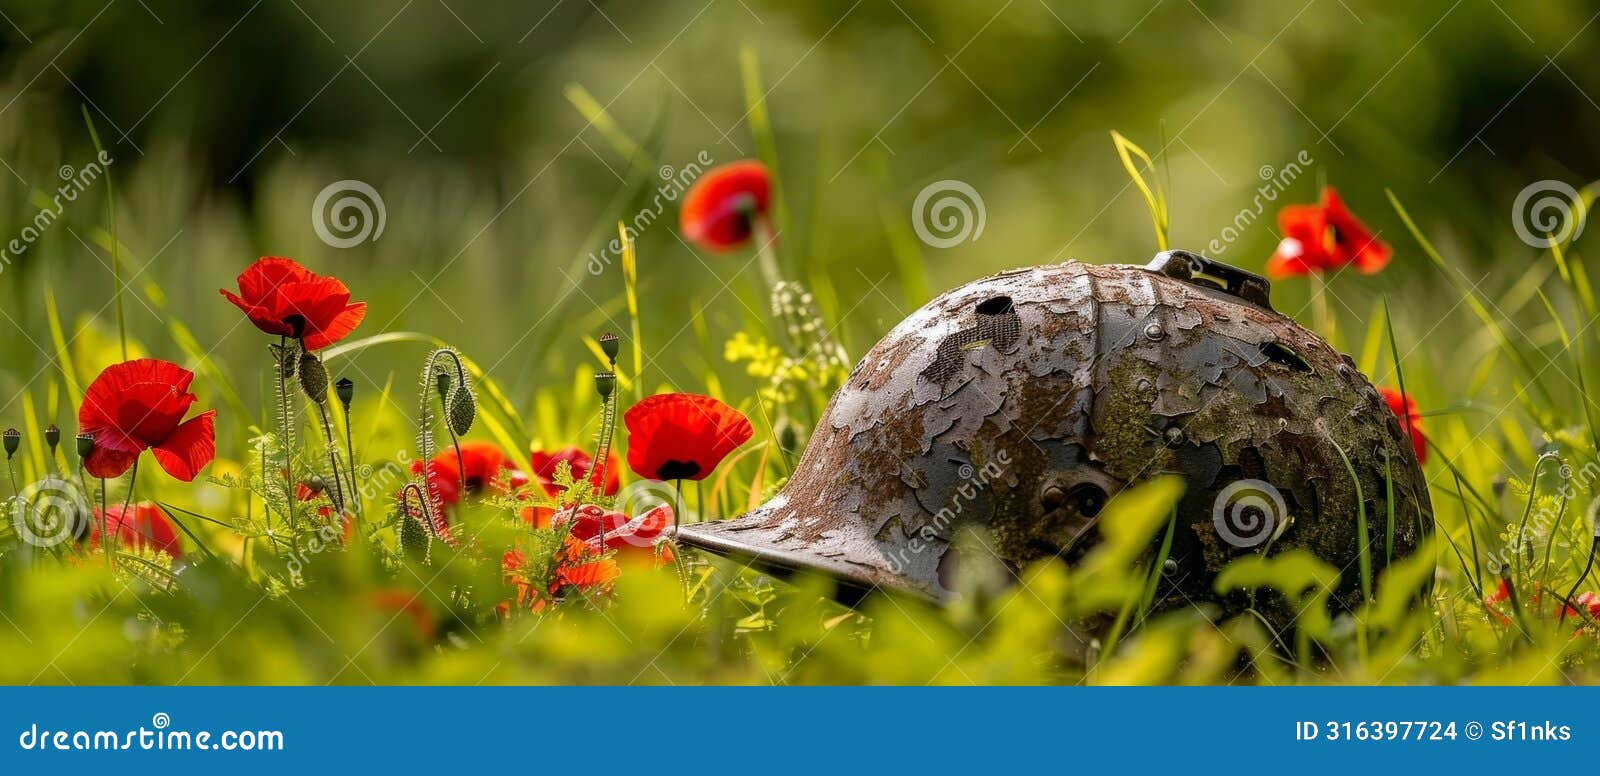 a battered military helmet rests amidst a sea of vibrant red poppies, a poignant juxtaposition of the harsh